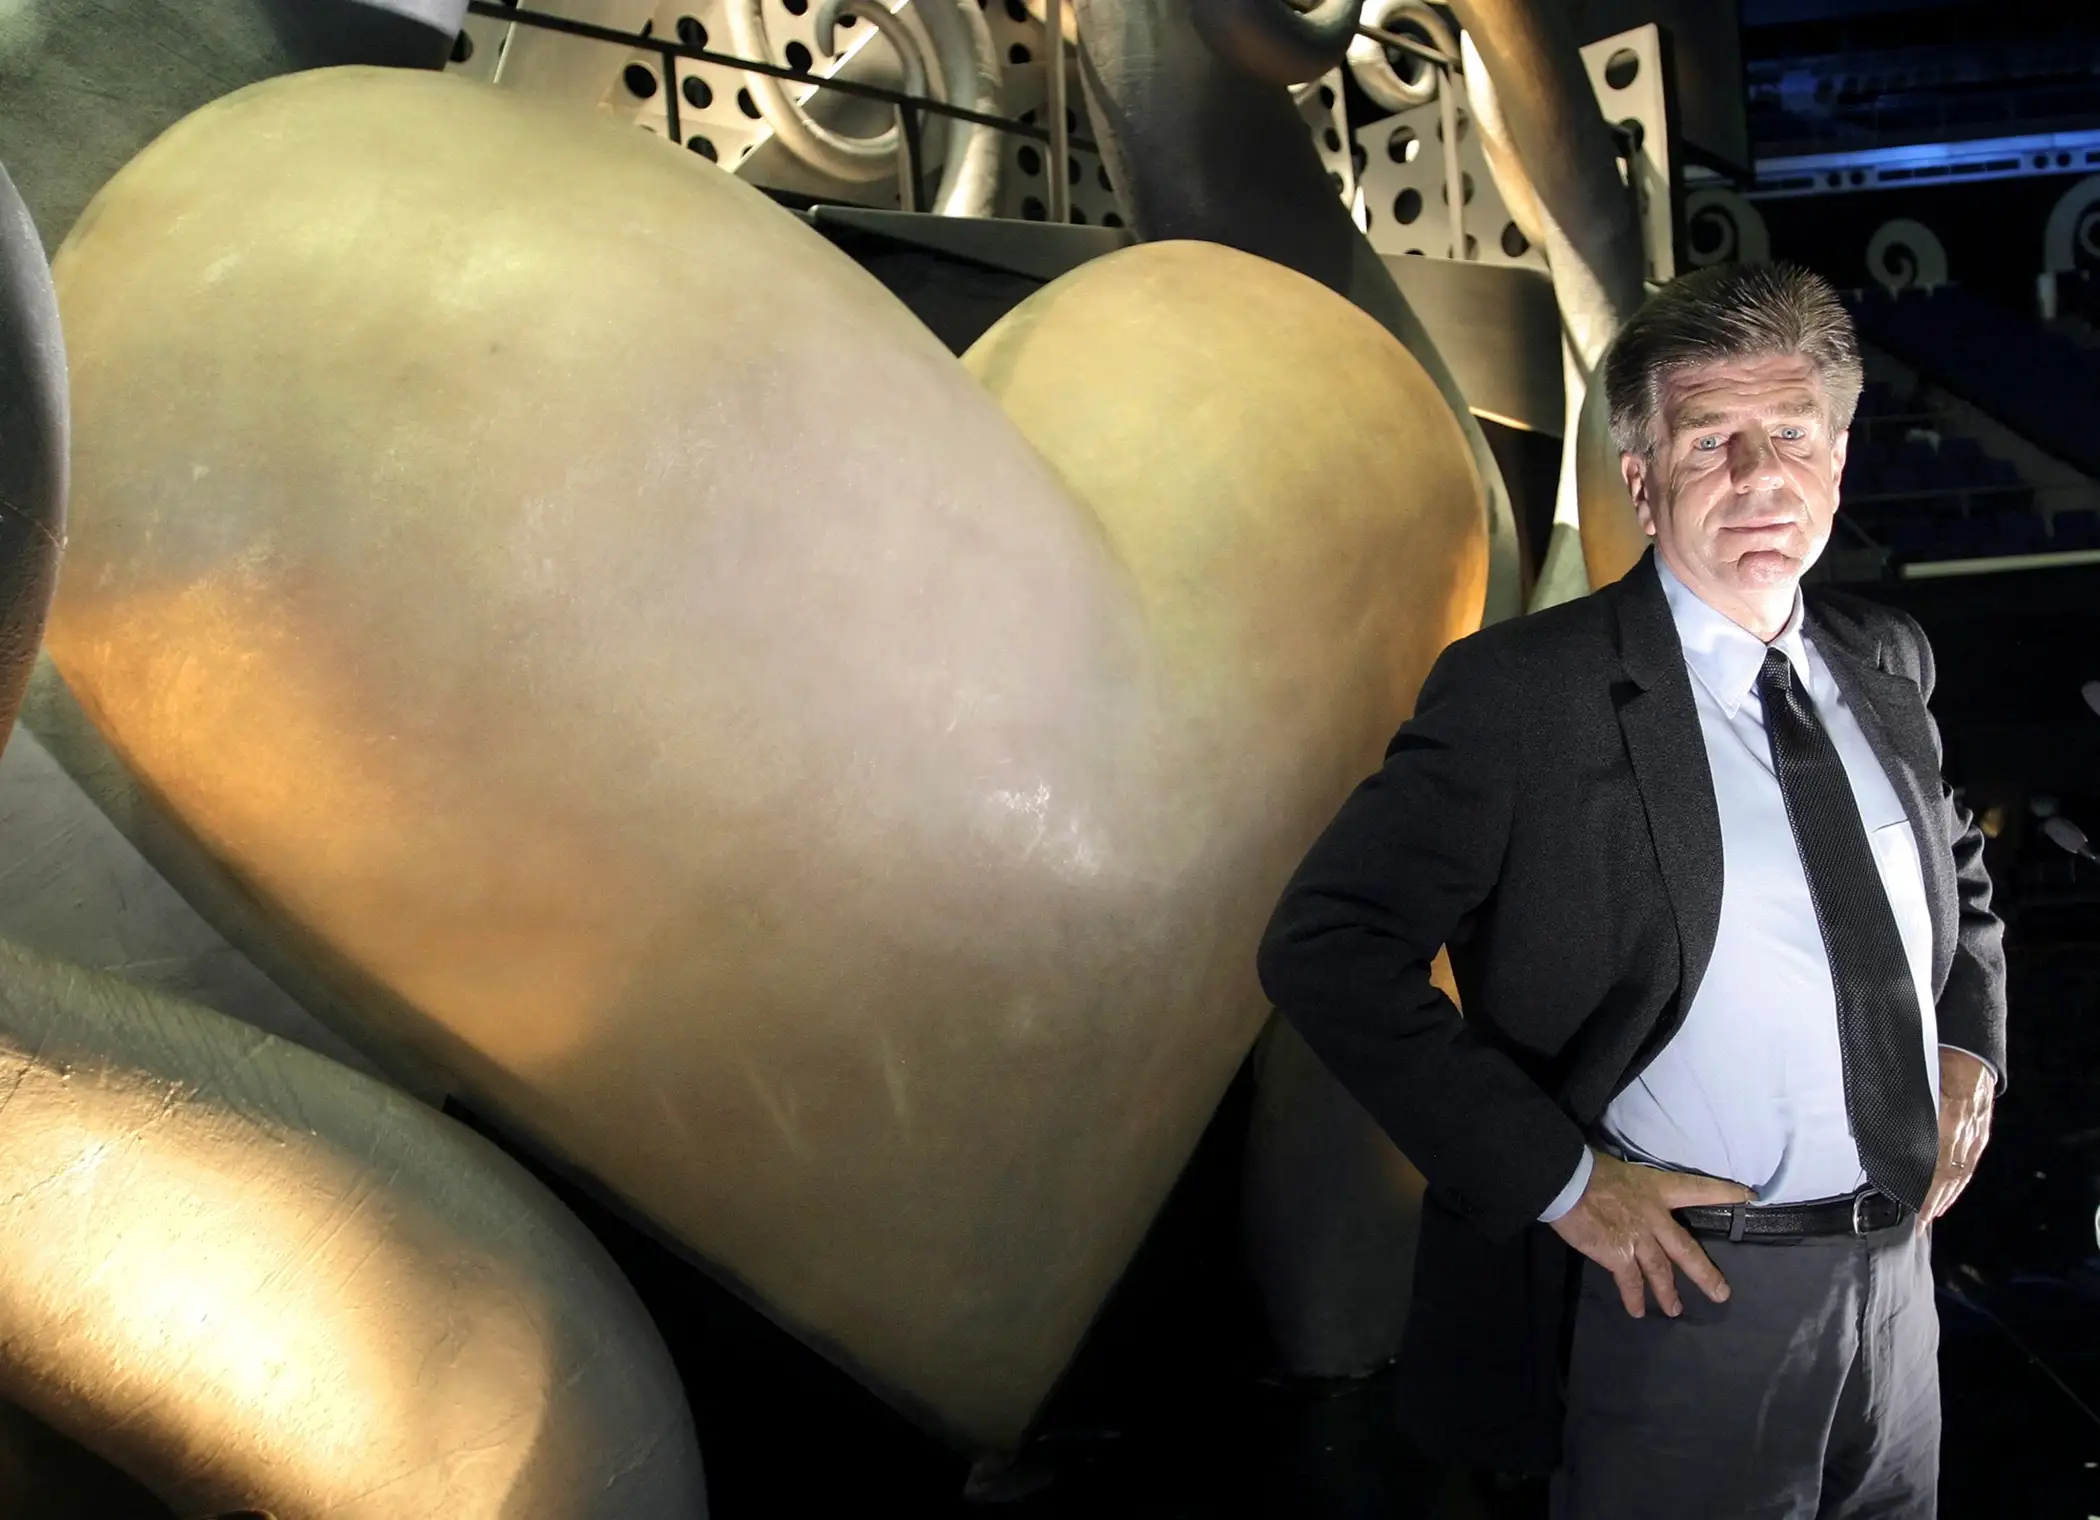 MTV Networks chairman and chief executive officer Tom Freston poses in front of a giant heart on the stage of the MTV Asia Awards in the Singapore Indoor Stadium on Friday, February 13, 2004.